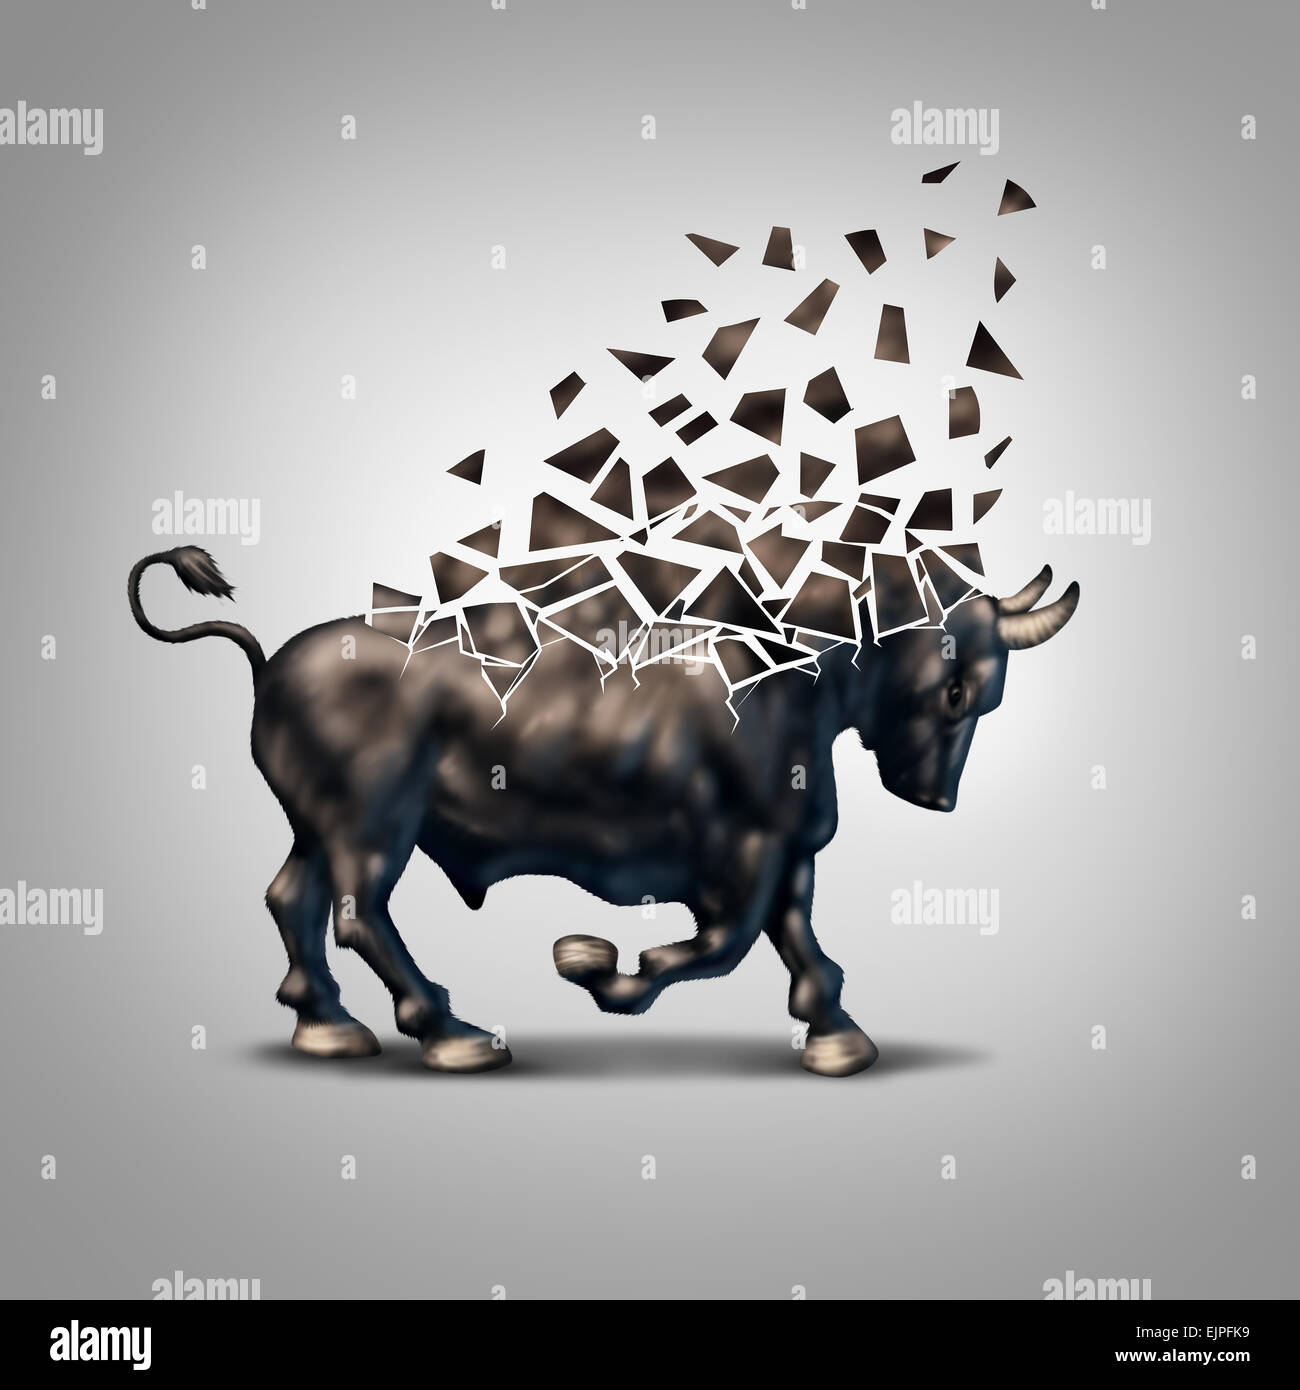 Fragile bull market financial crisis concept as an economic symbol for a crumbling positive forecast and investments falling apart due to valuation loss in the stock market. Stock Photo